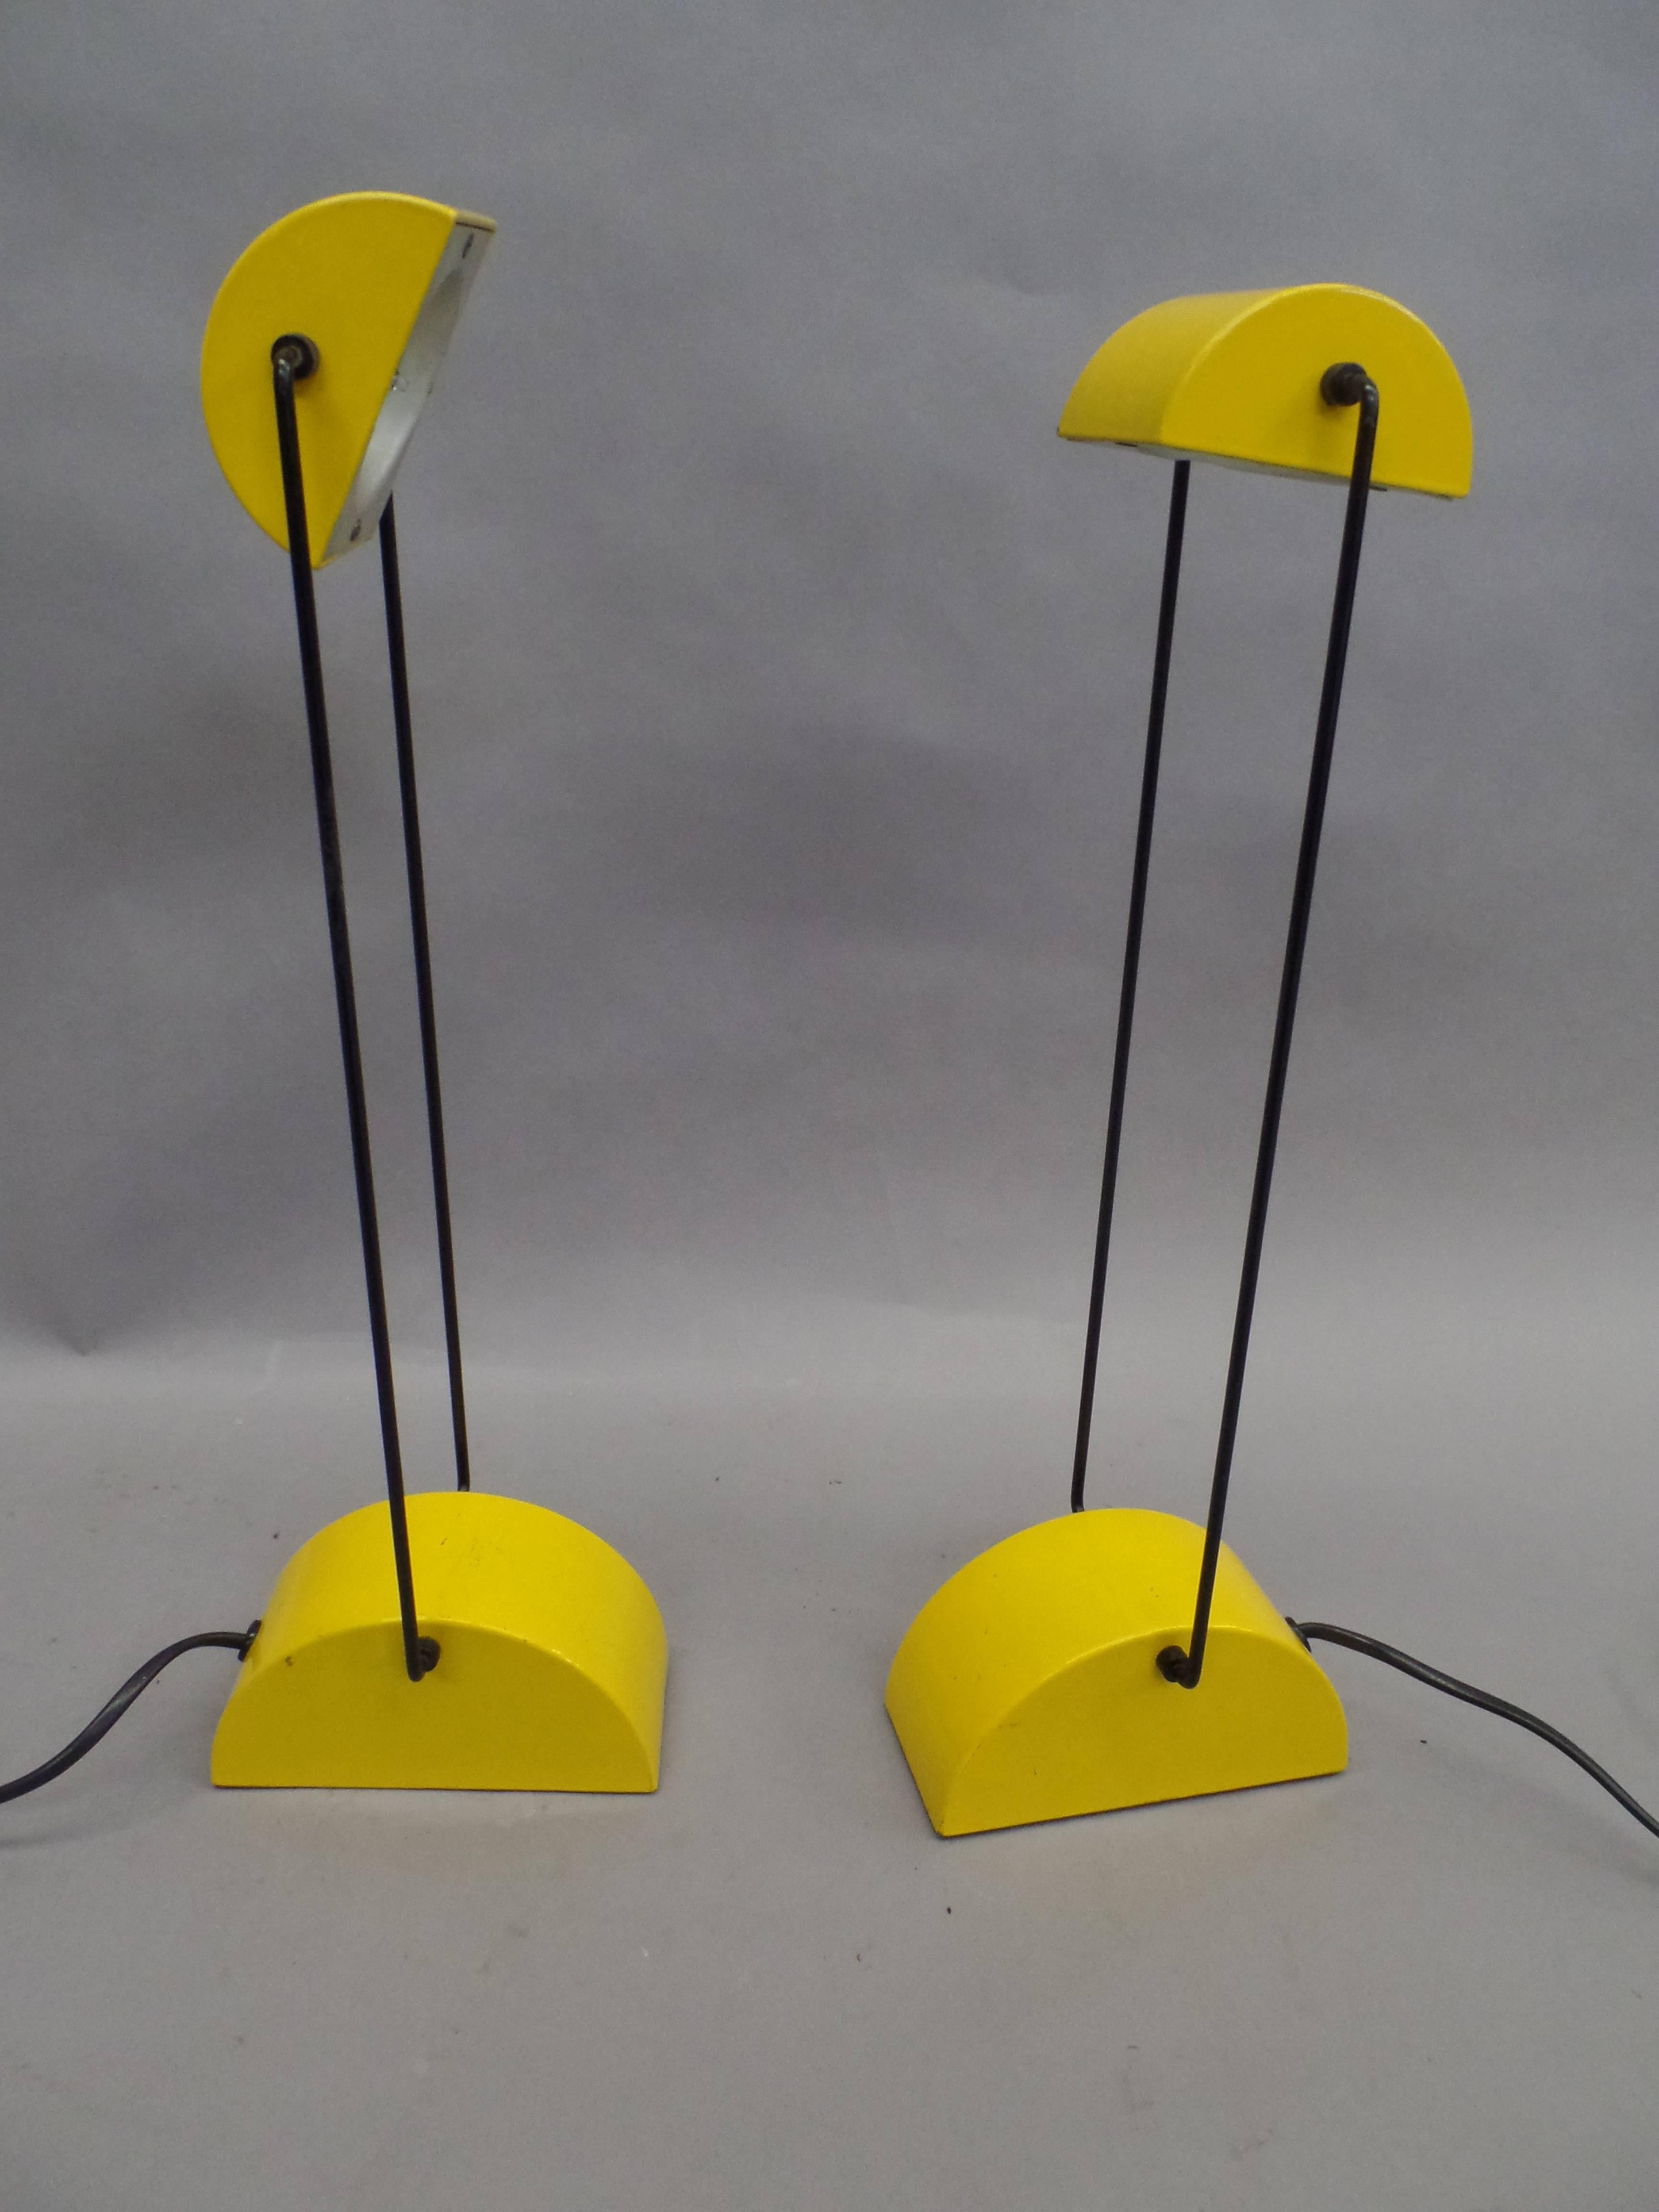 Dramatic pair of Italian table lamps by Bilumen showing the influences of Mid-Century Modern, Minimalist, Spage Age and memphis design. 

Simple, beautiful forms with a dramatic color contrast in yellow and black enameled metal and with pivoting,